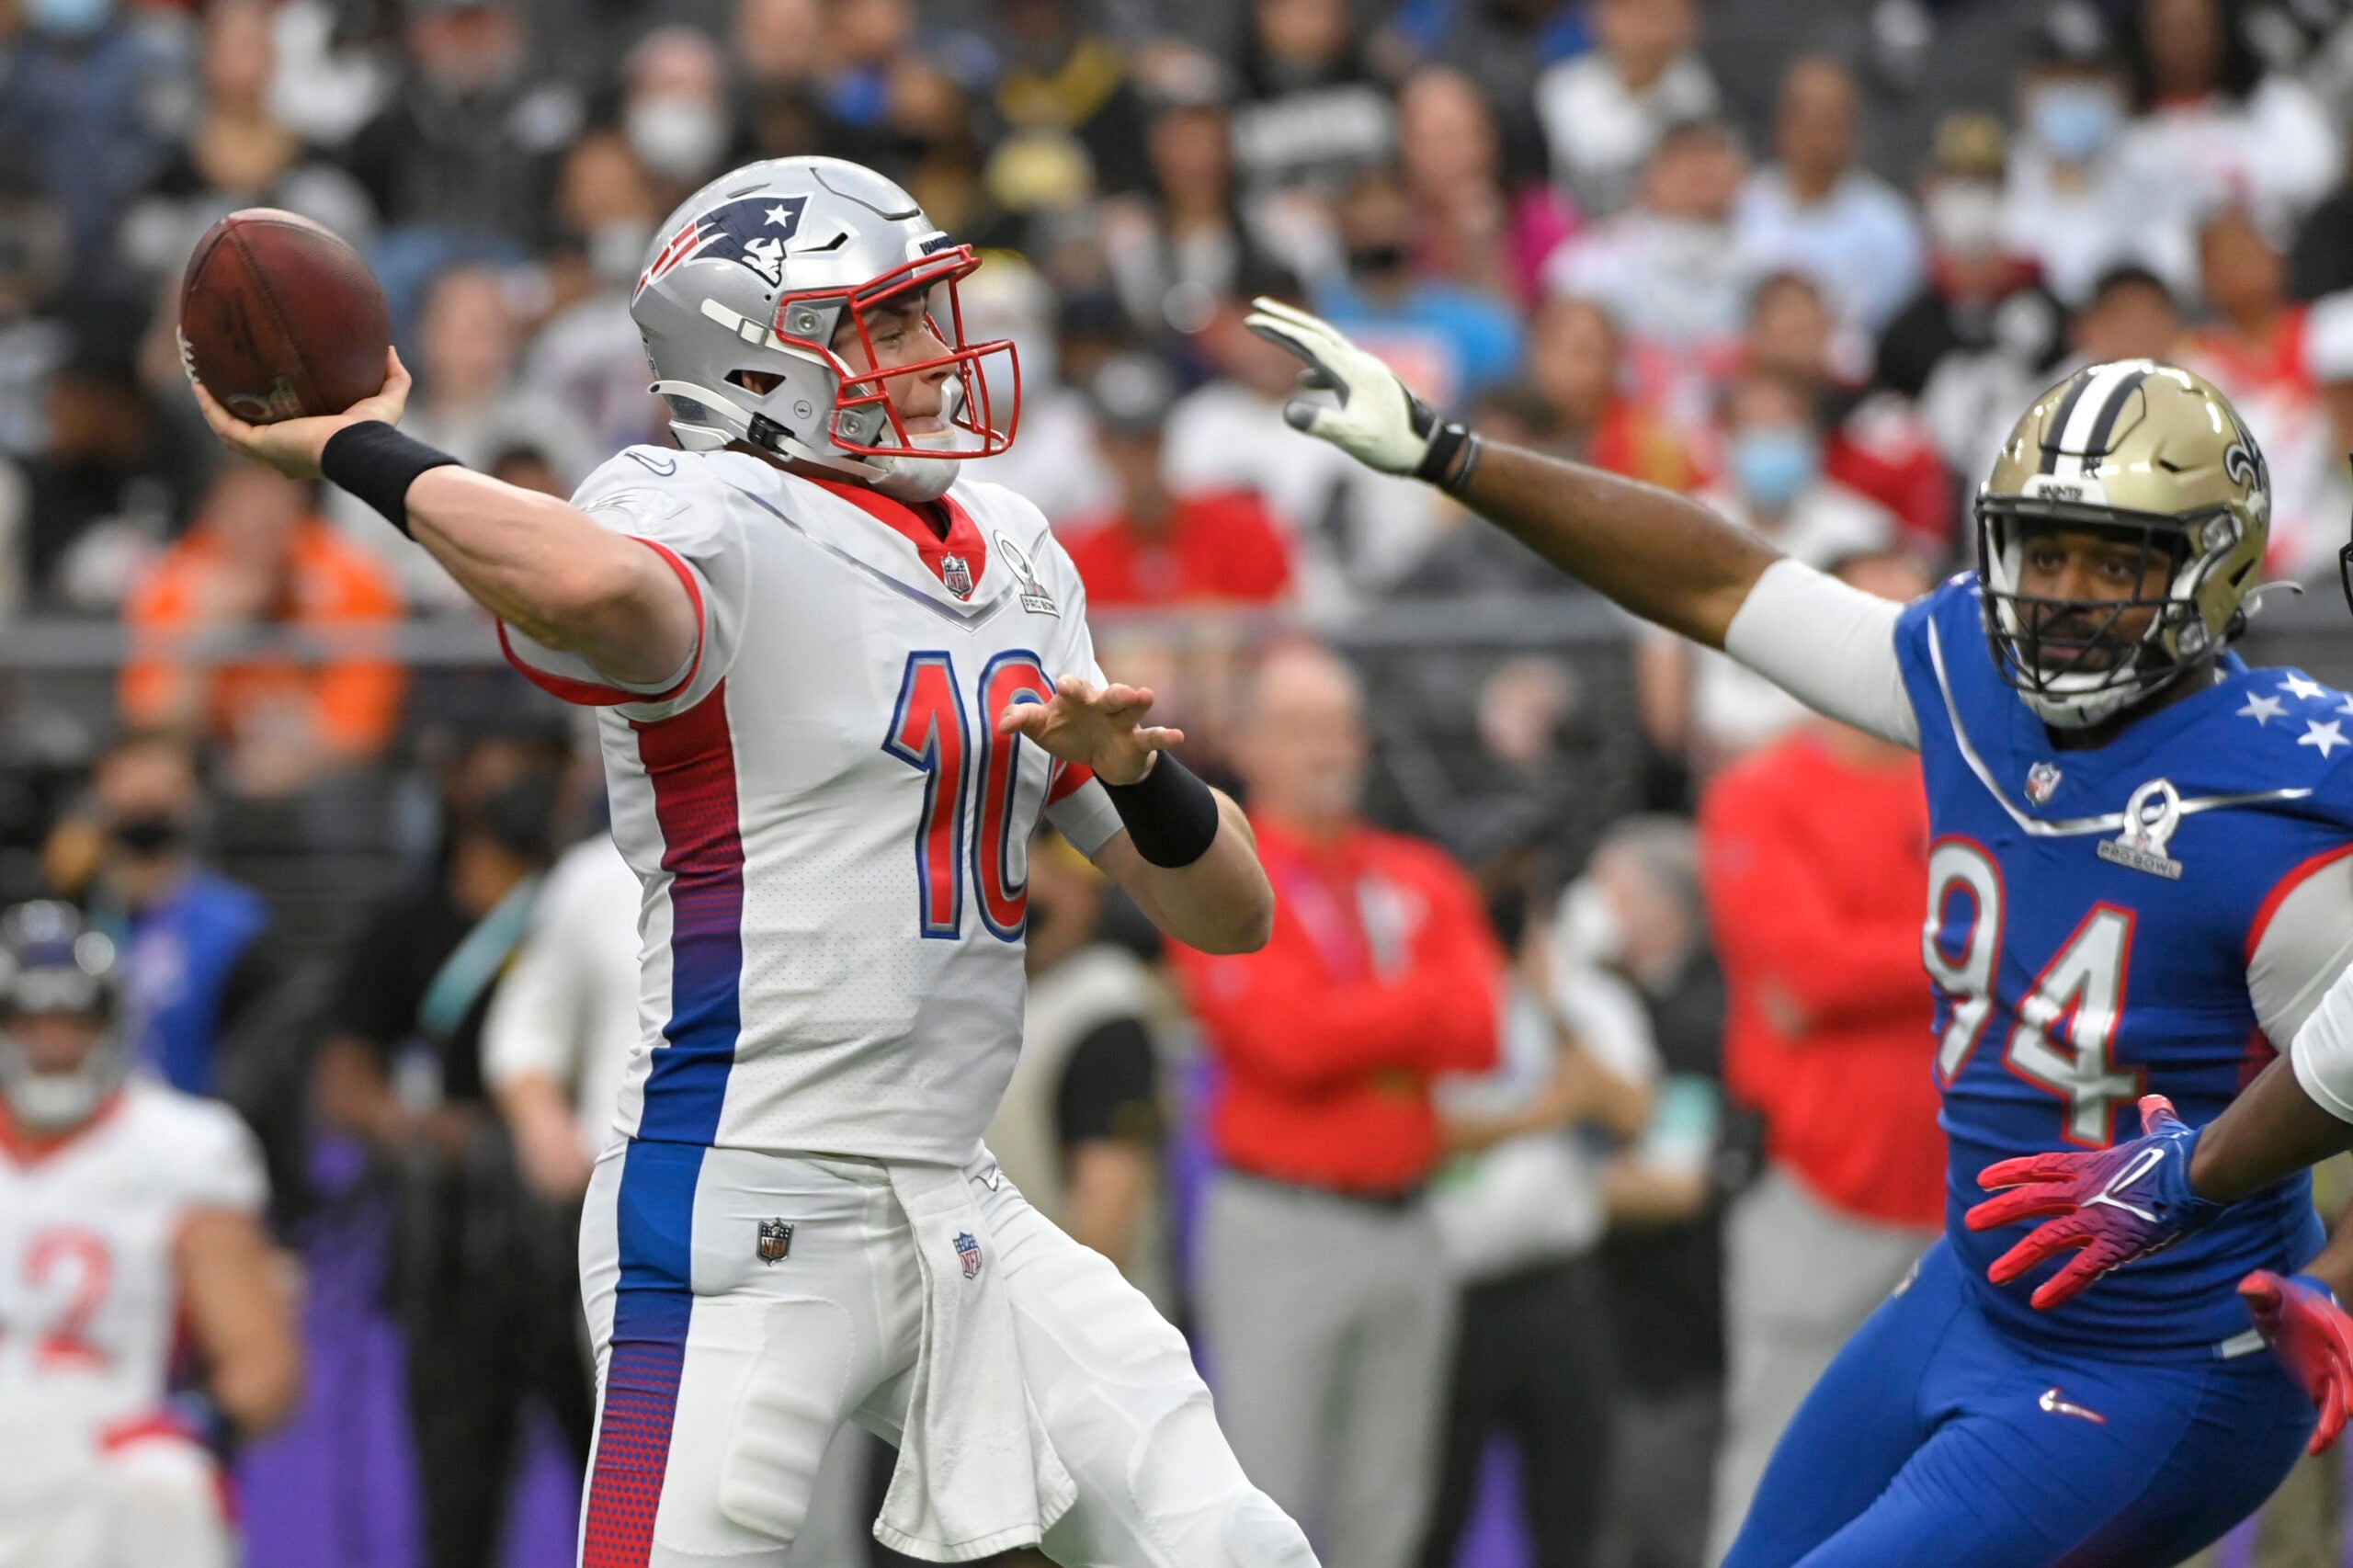 Watch Mac Jones do the Griddy, throw for a touchdown in the Pro Bowl